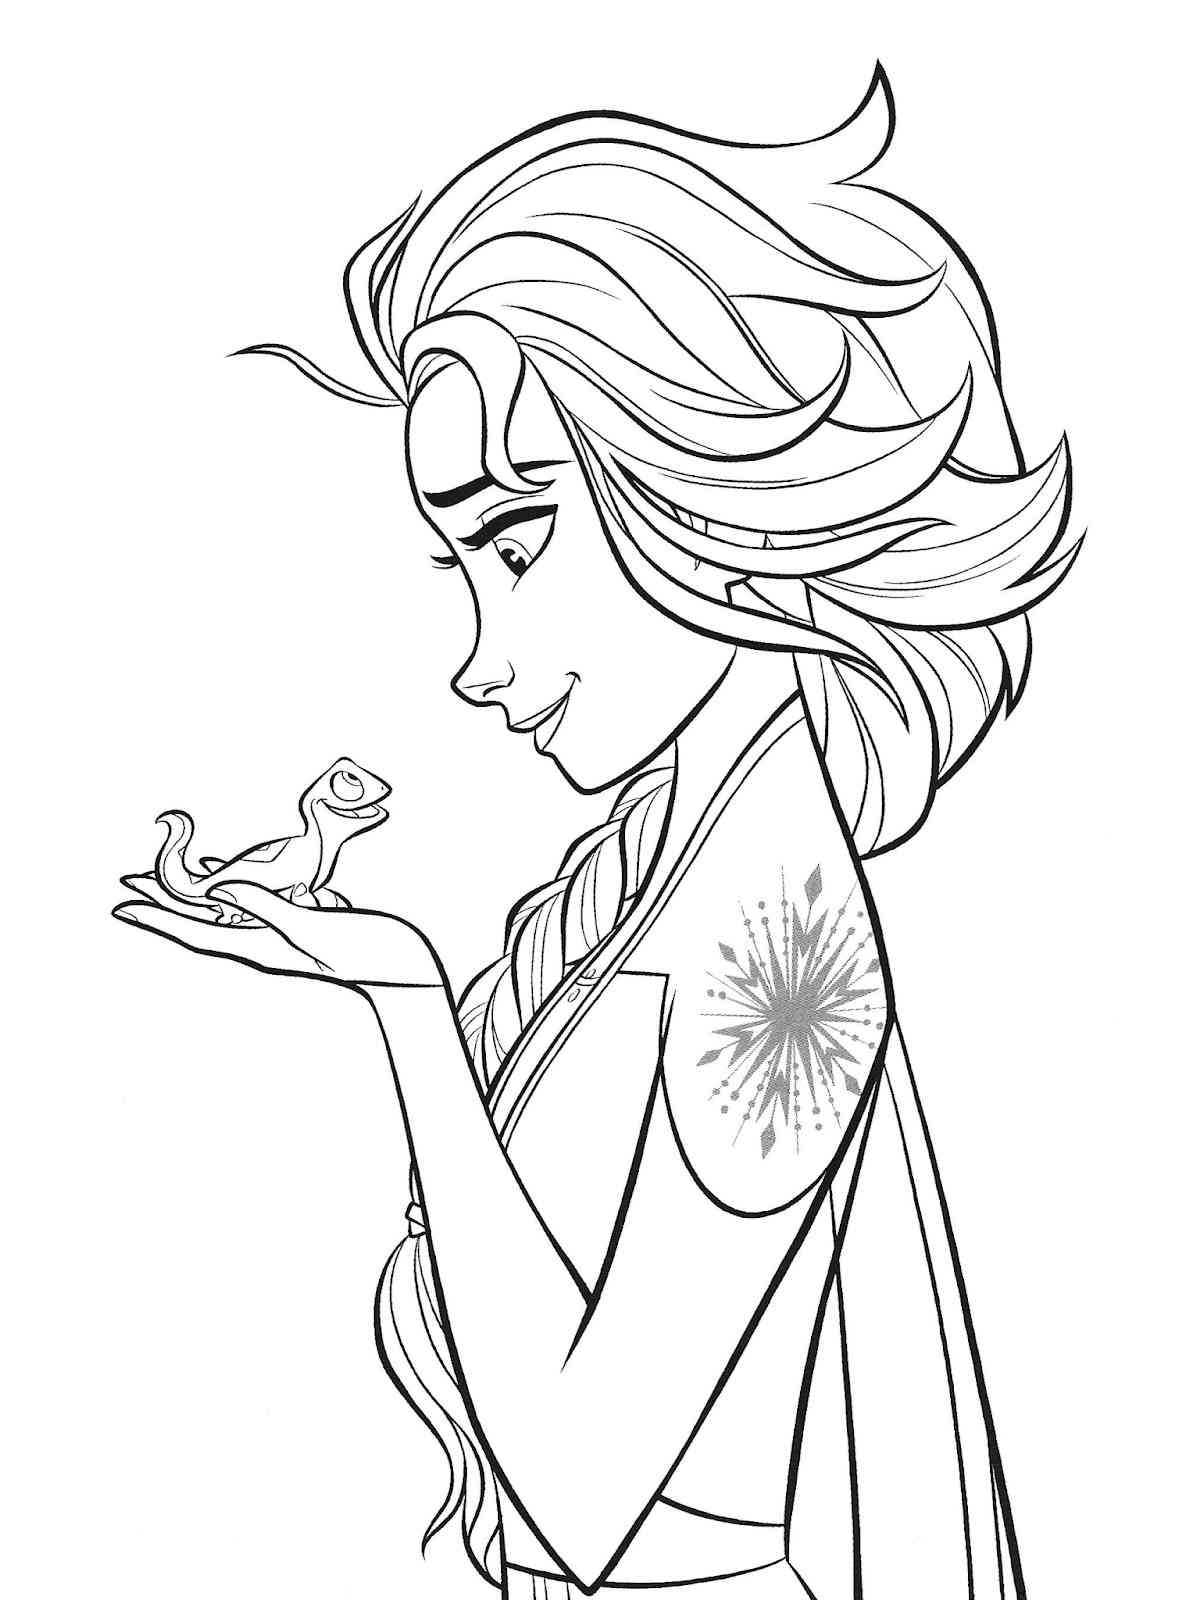 Frozen 22 coloring page